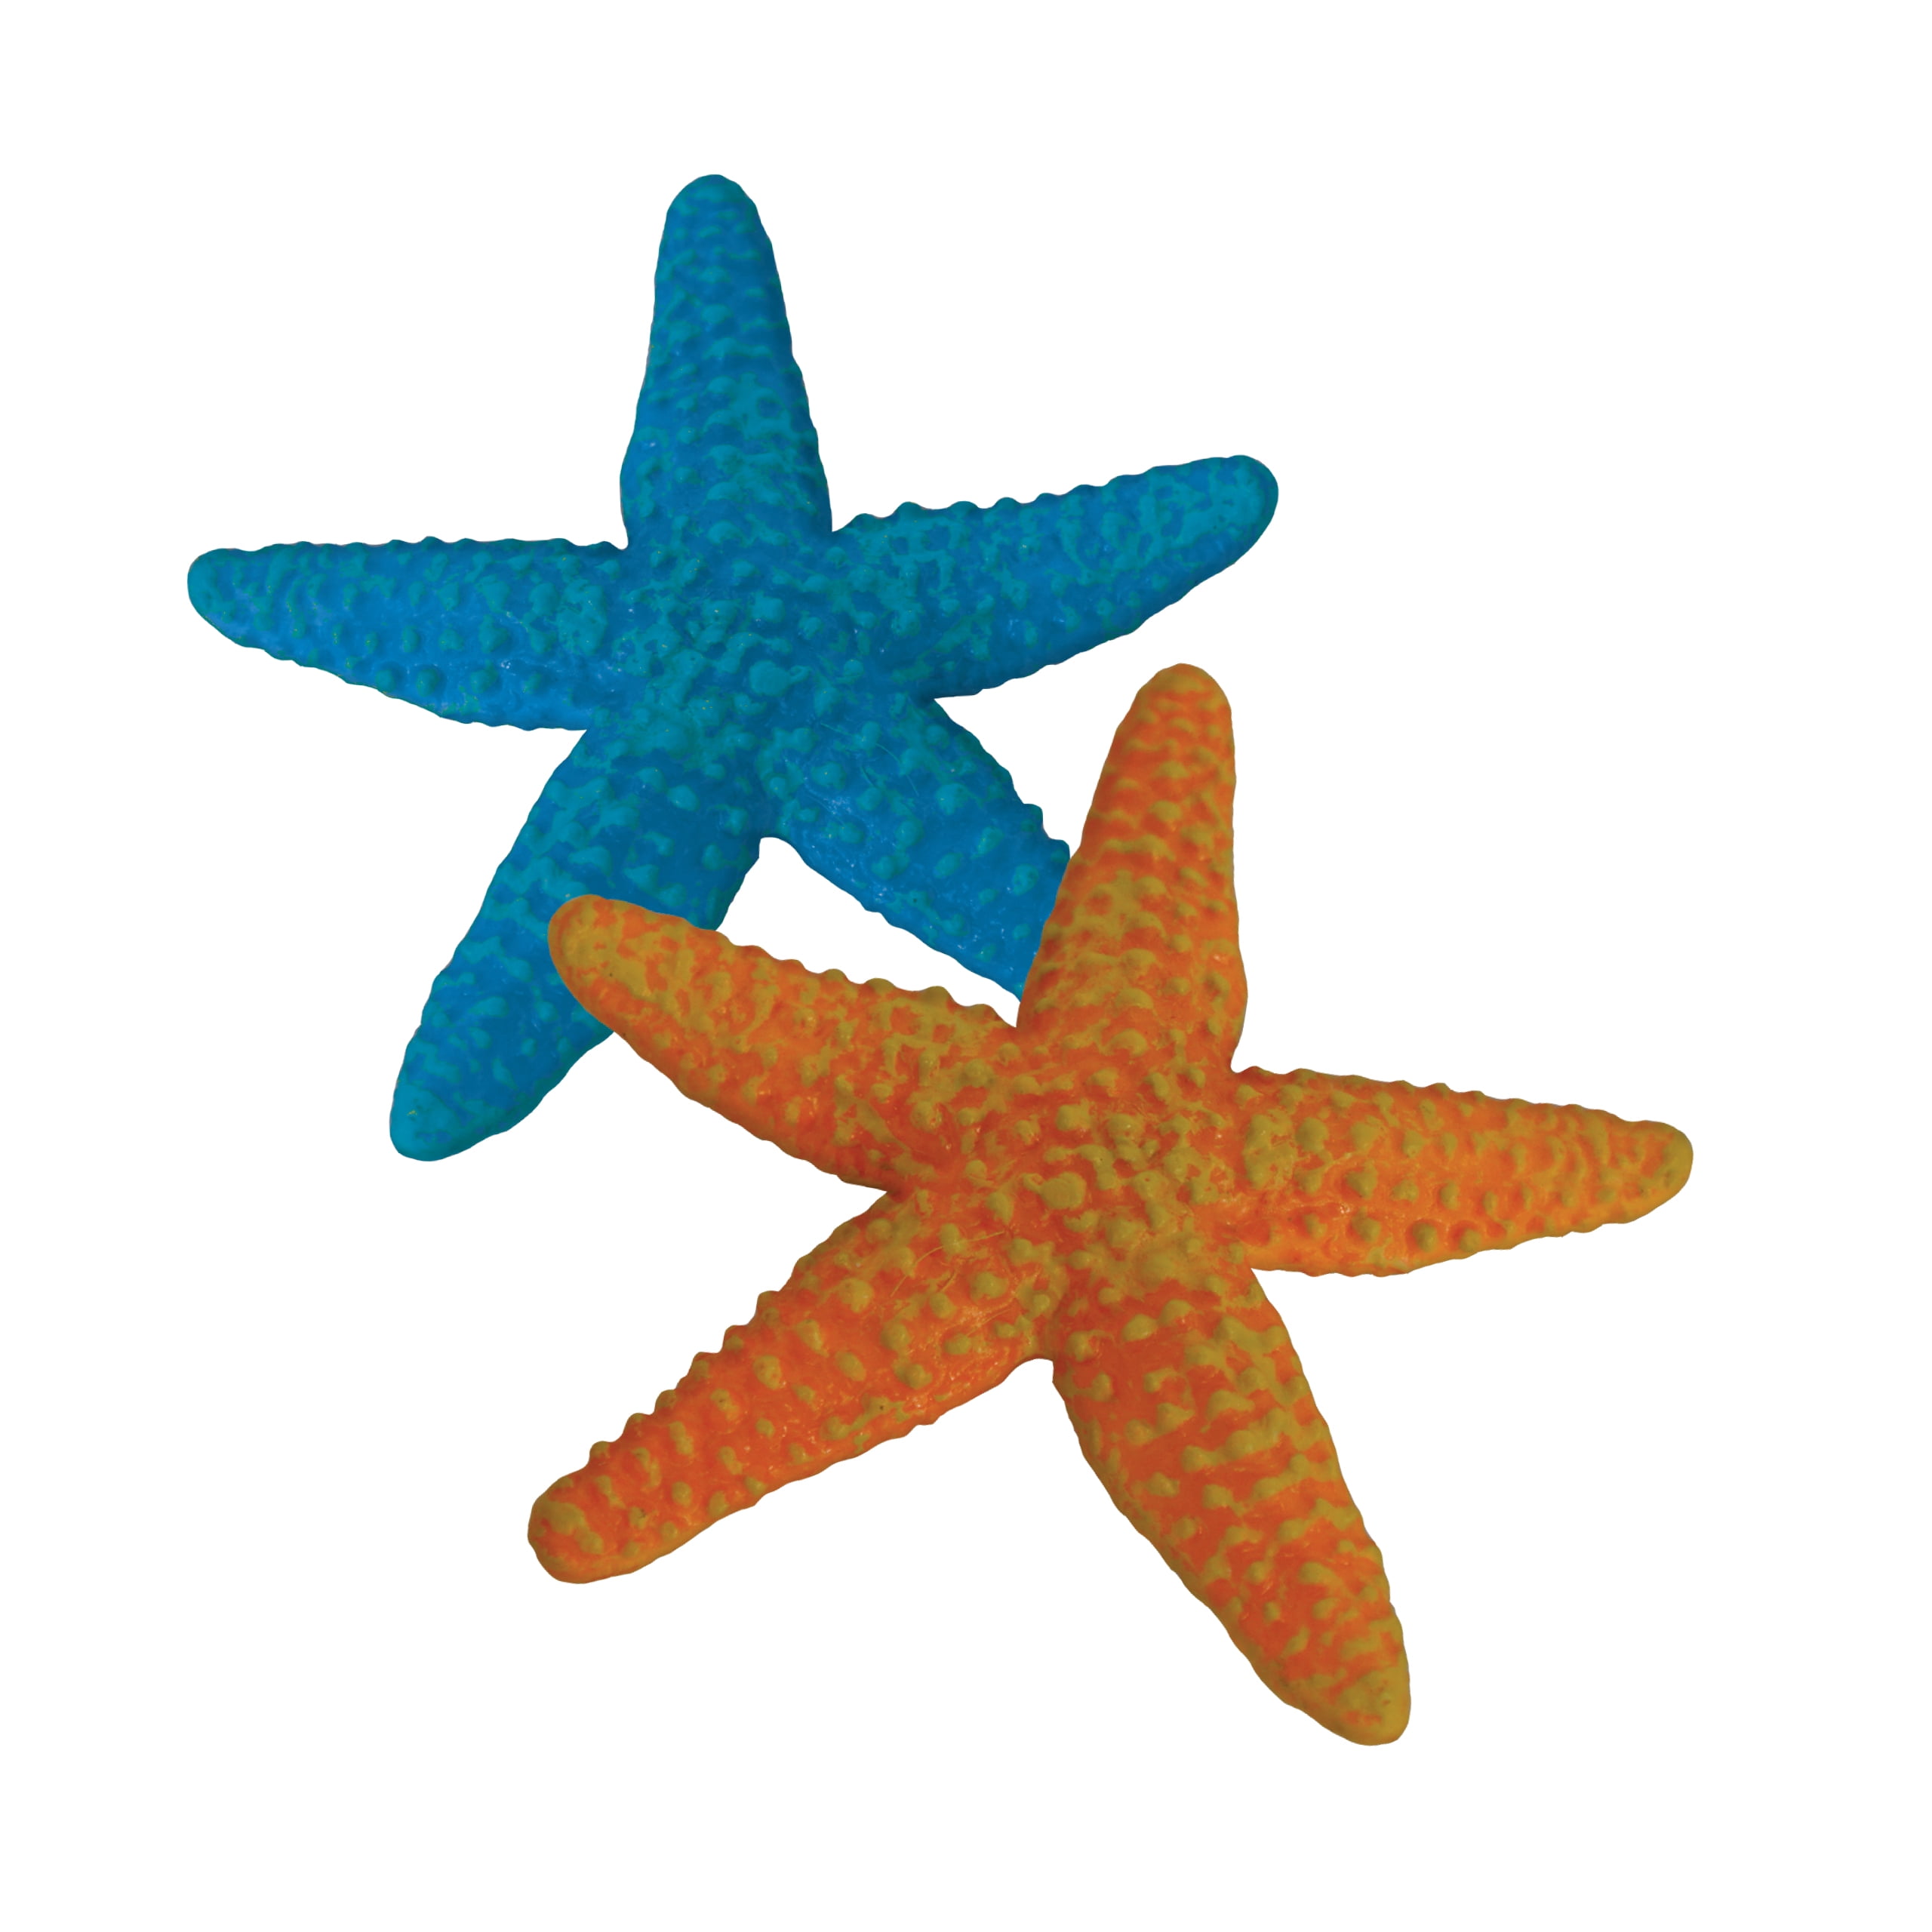 Mini Animal Adventure Replica - Starfish from Deluxebase. Small sized  realistic toy figure that makes an ideal sealife animal toy for kids -  